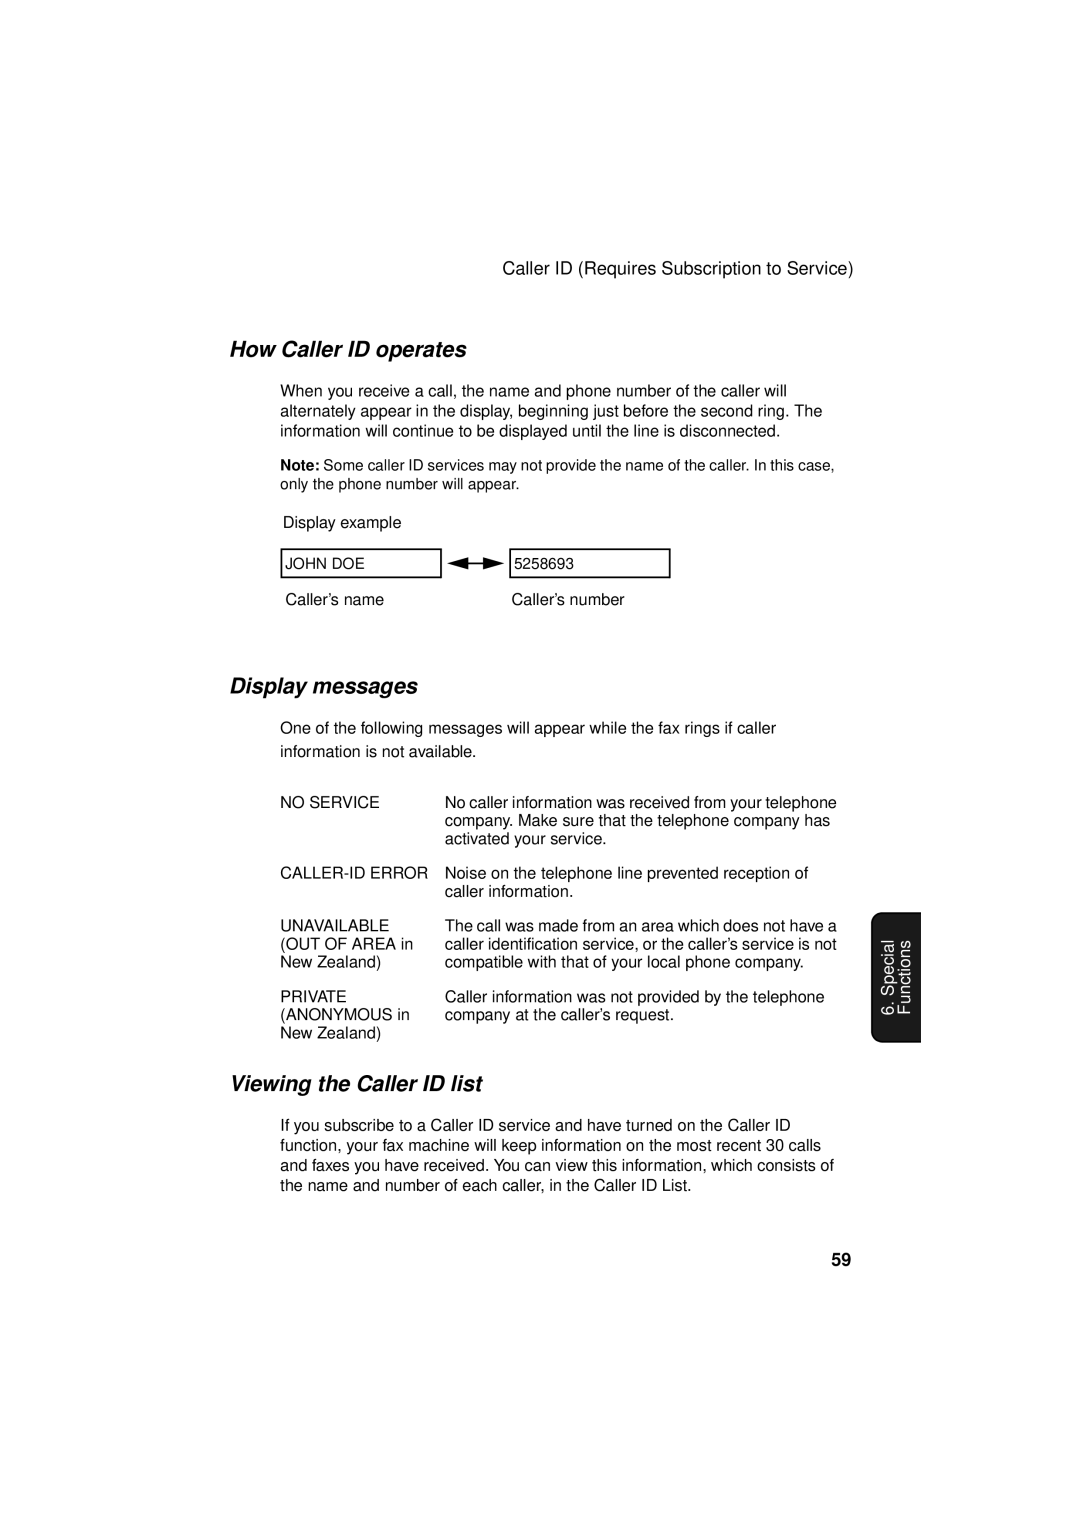 Sharp FO-P610/FO-P630 operation manual How Caller ID operates, Display messages, Viewing the Caller ID list 